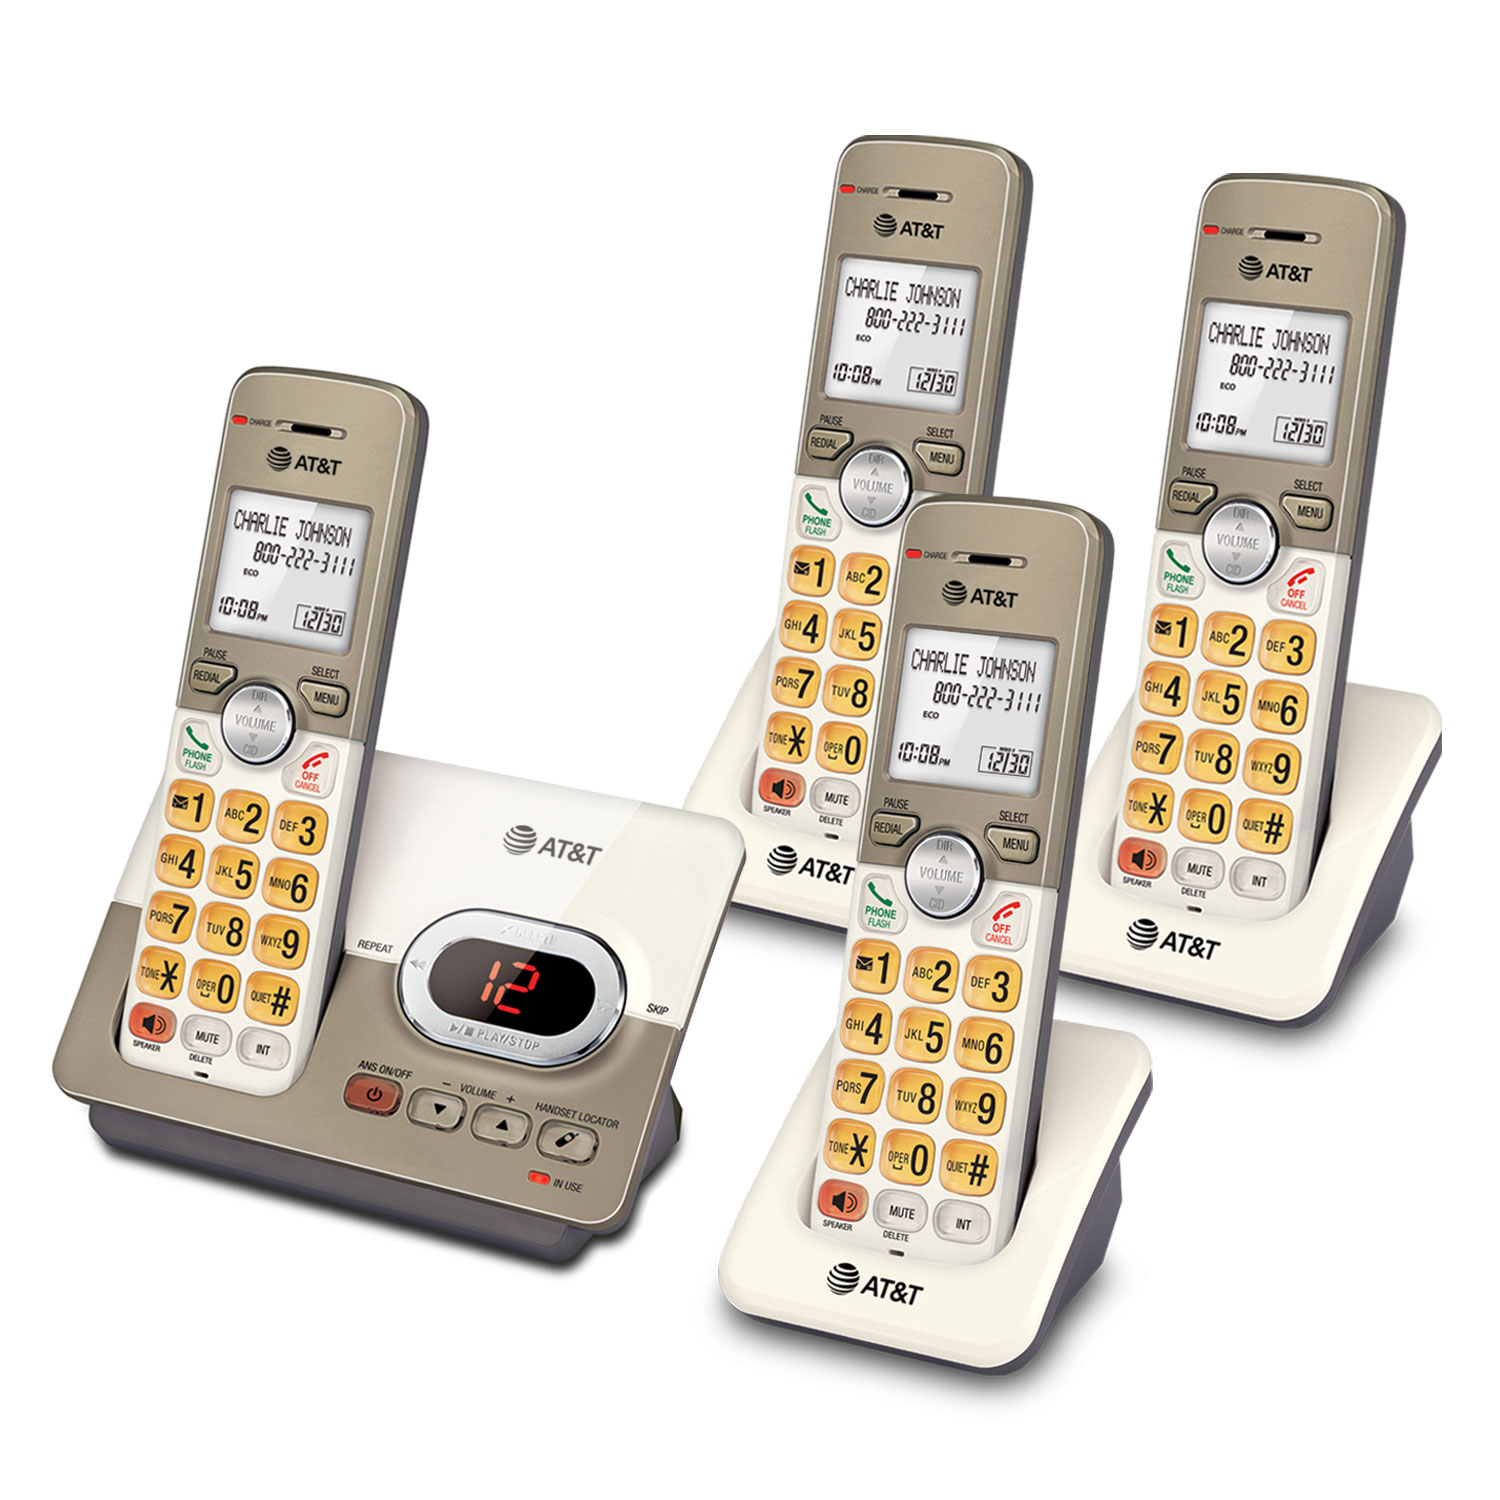 4 handset cordless answering system with caller ID/call waiting - view 2